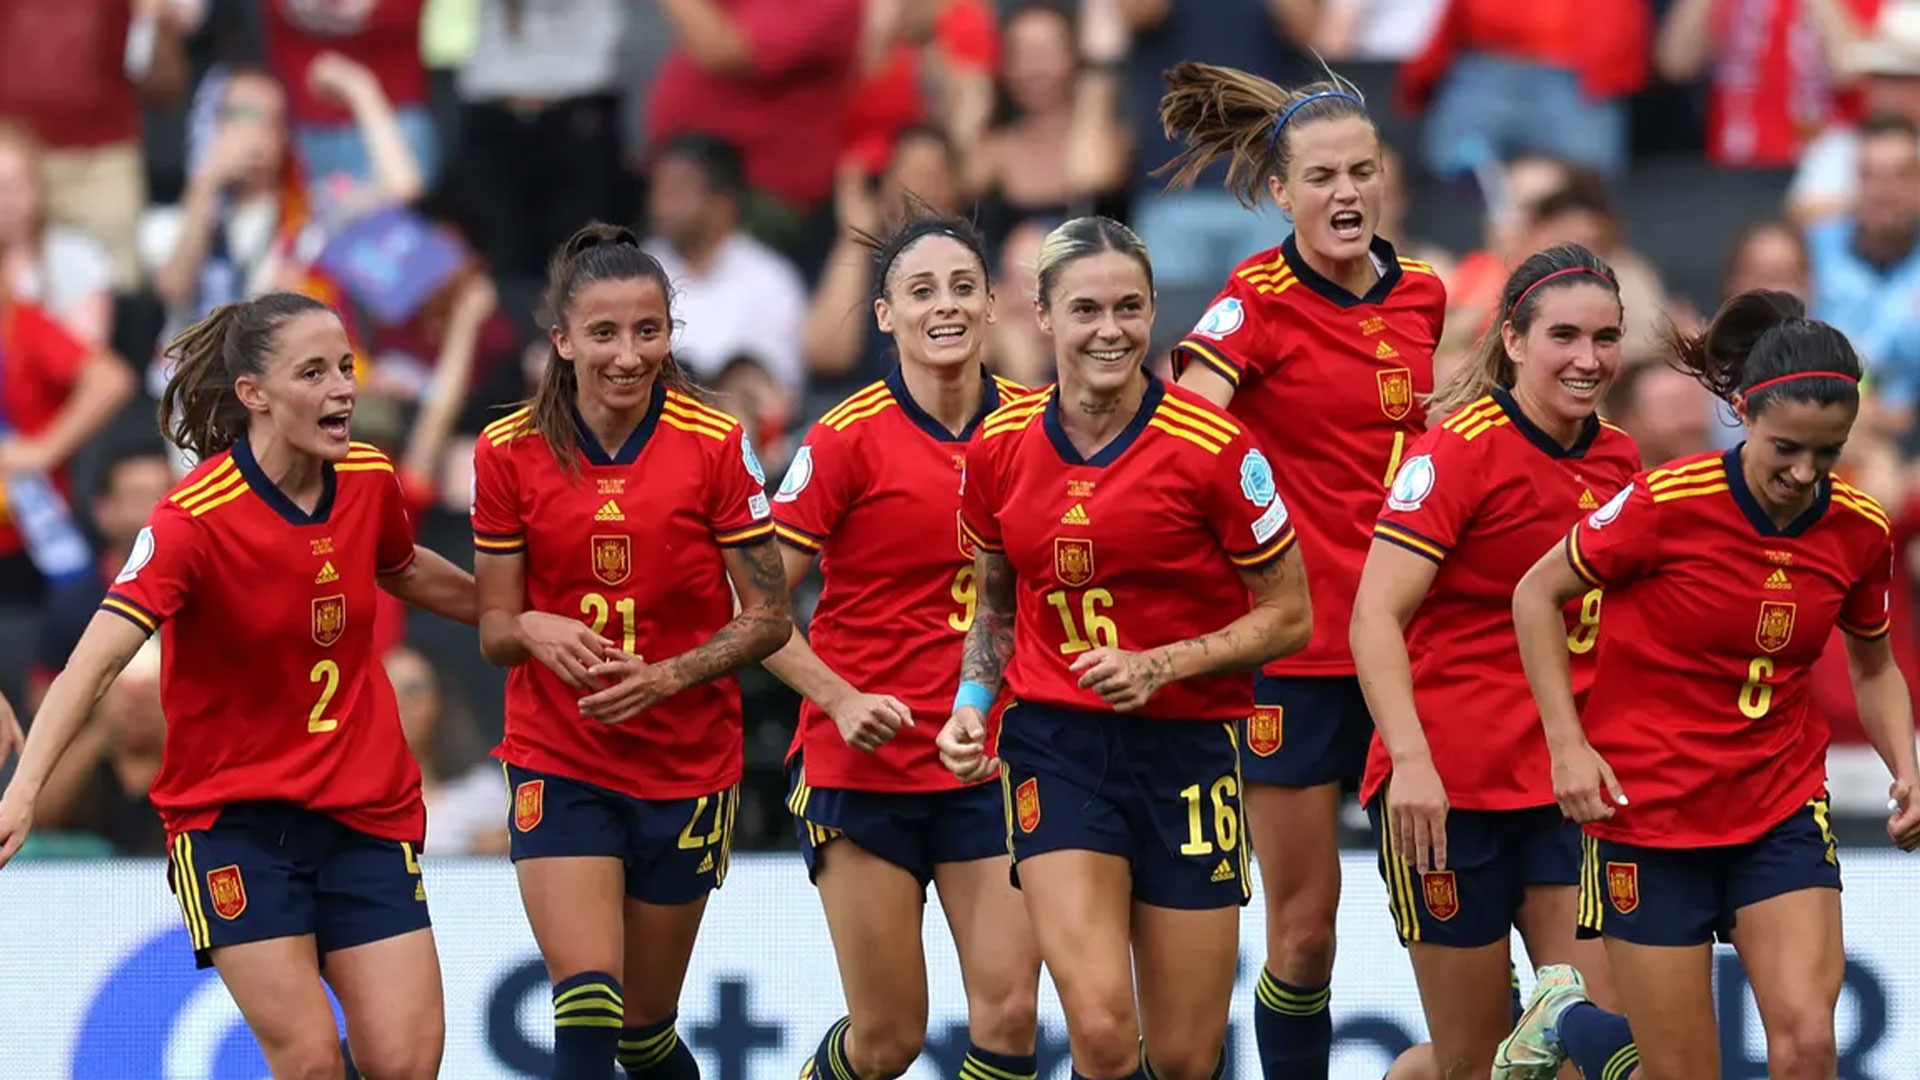 Spain’s National Women’s Soccer Team Wins the World Cup for the First Time!